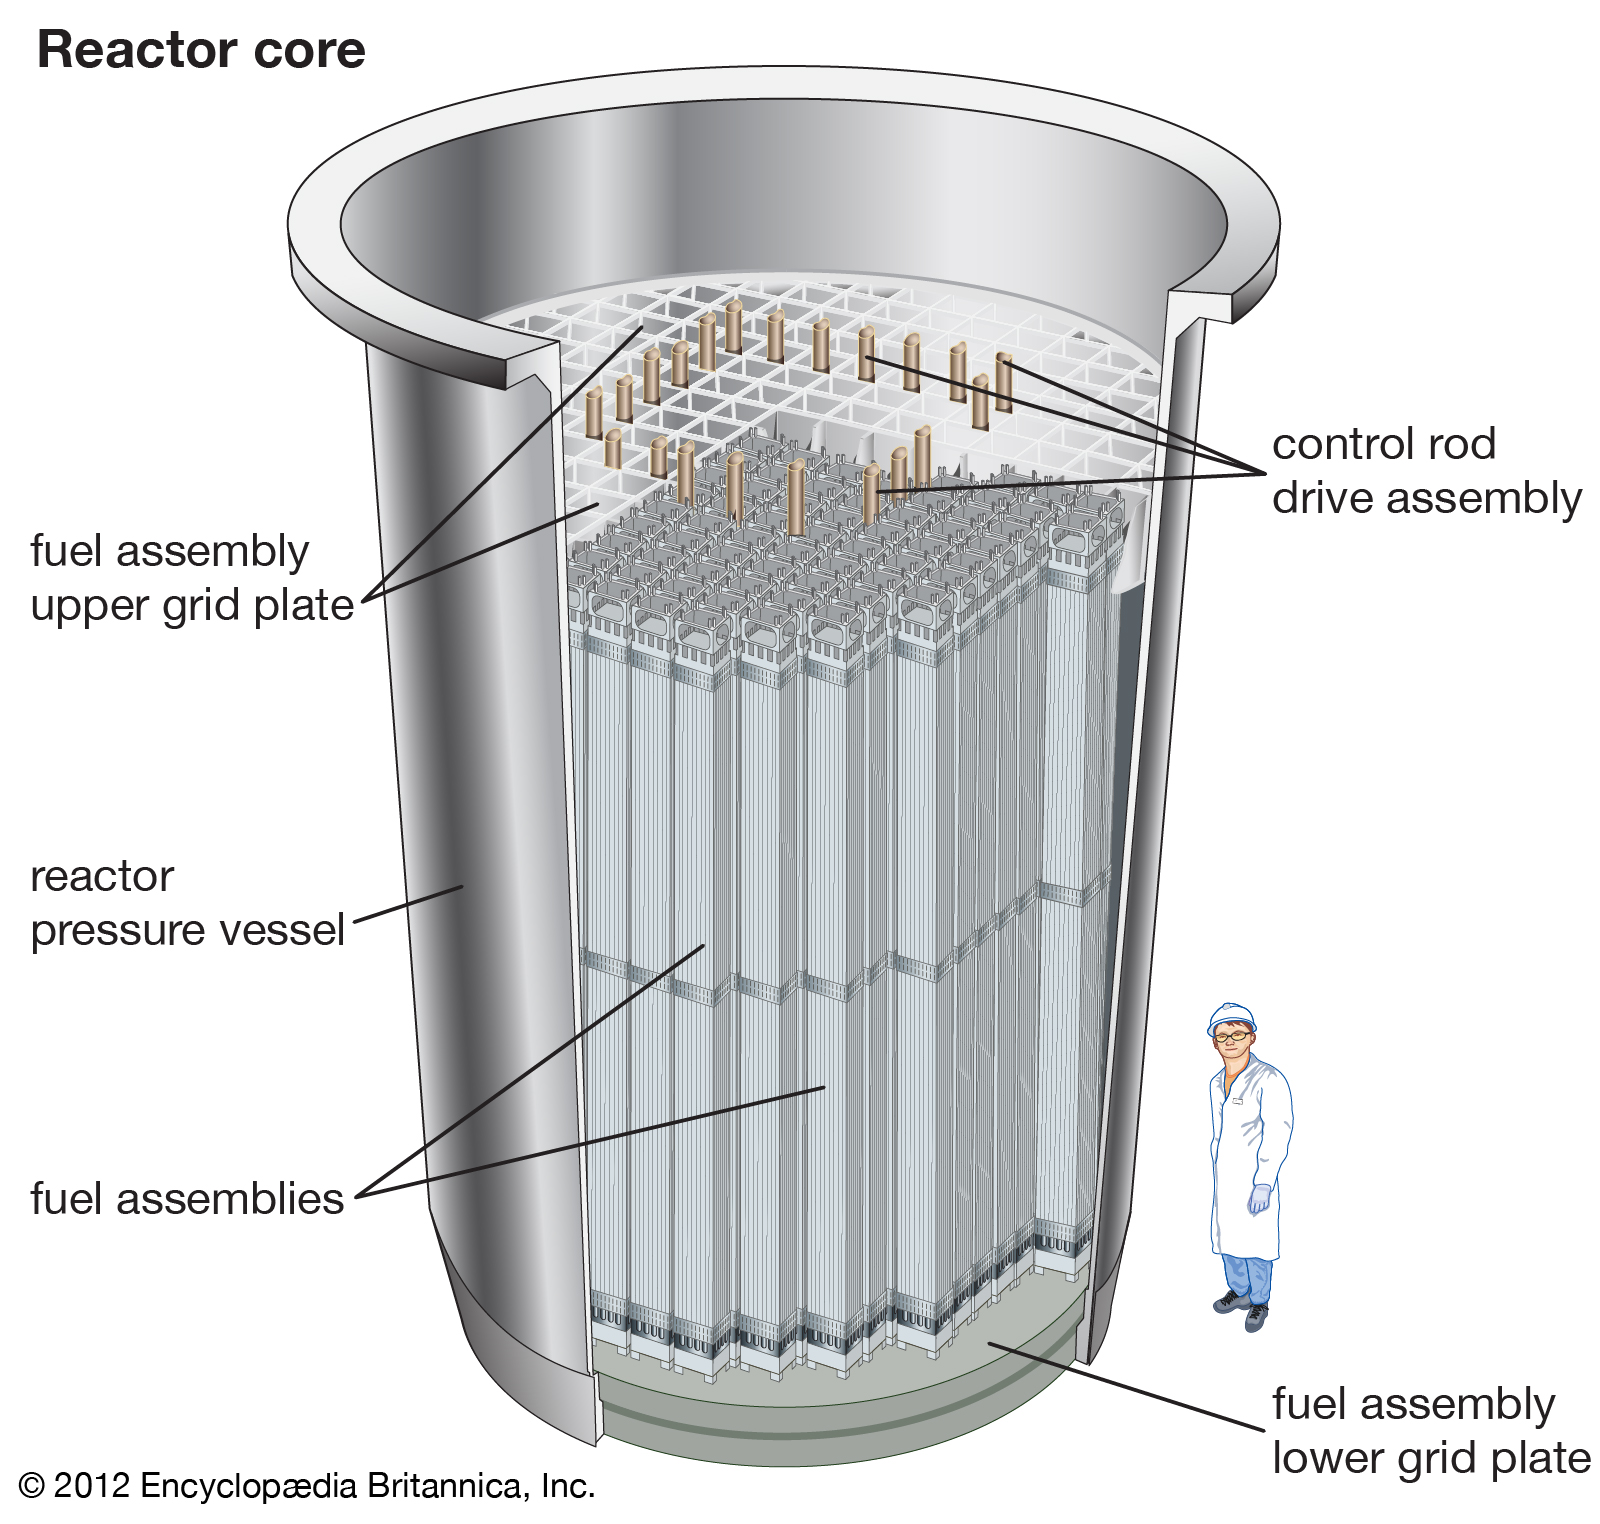 Components of nuclear reactor